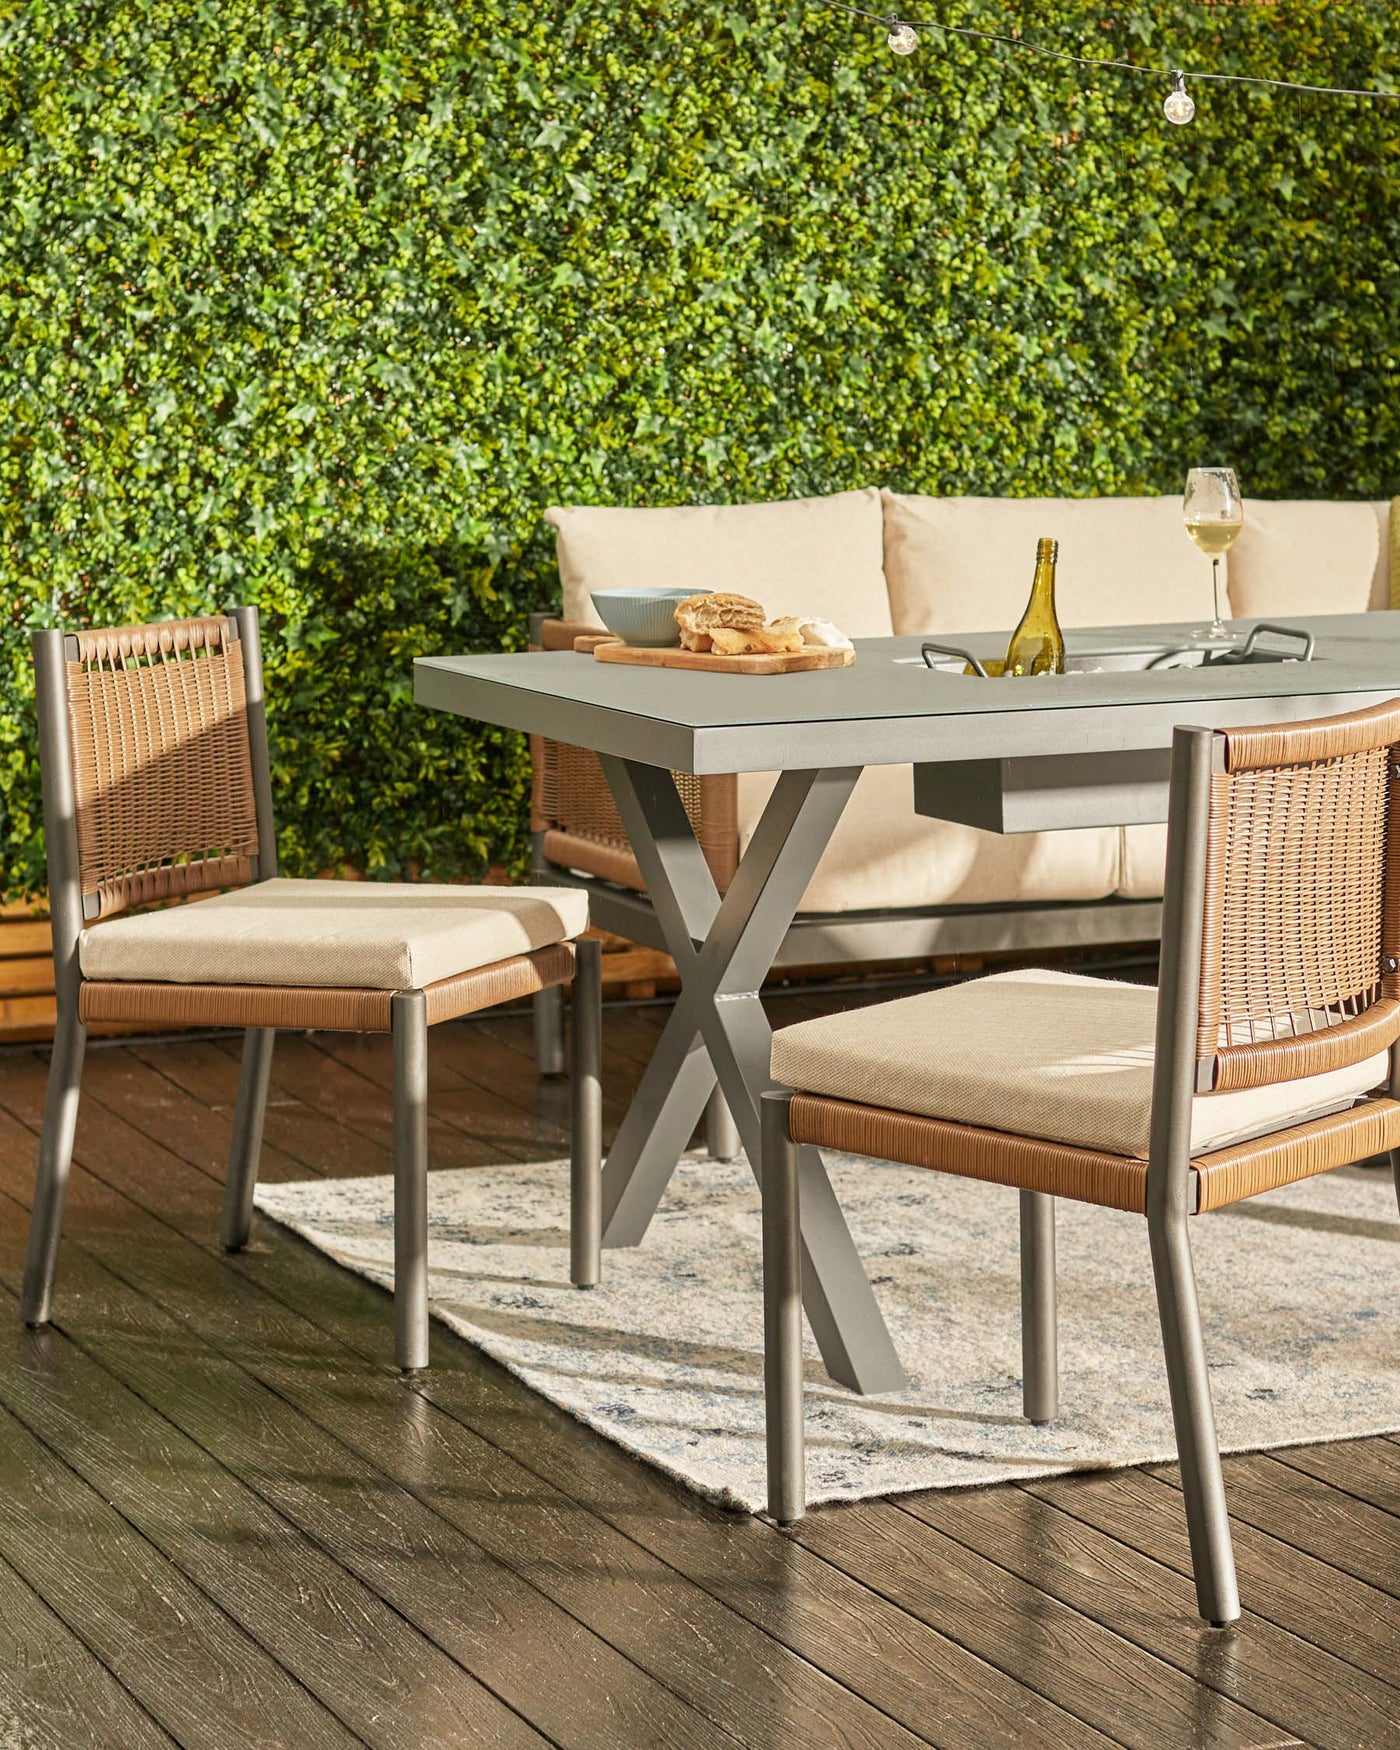 Outdoor patio furniture set featuring a modern grey dining table with a unique X-shaped base and two beige upholstered dining chairs with grey metal frames and wicker panel accents, arranged on a faded print area rug over wooden decking, against a backdrop of a lush green hedge. A sofa with off-white cushions is partially visible.